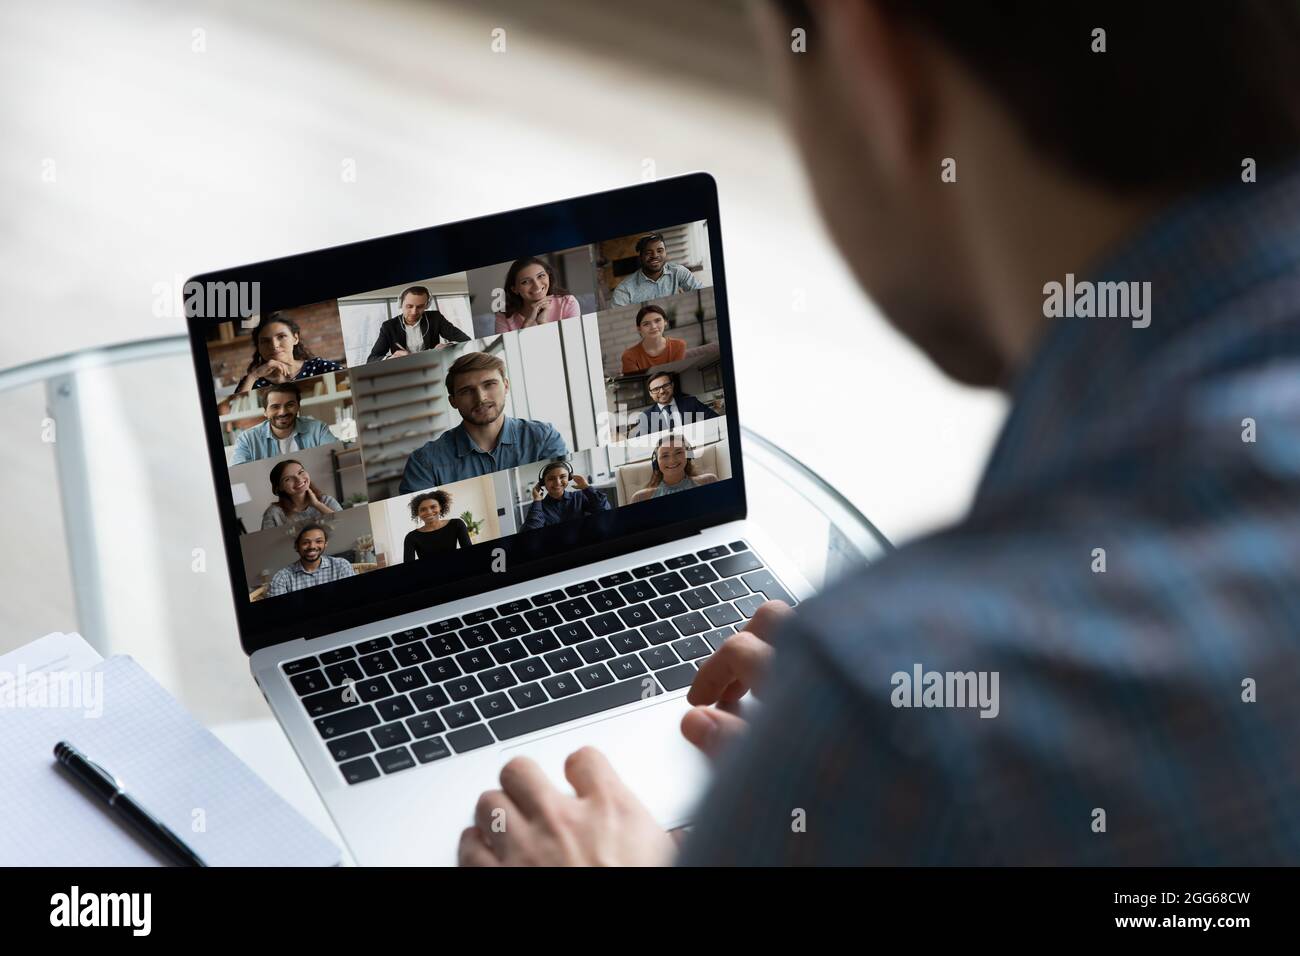 Laptop screen with business group video call head shots Stock Photo